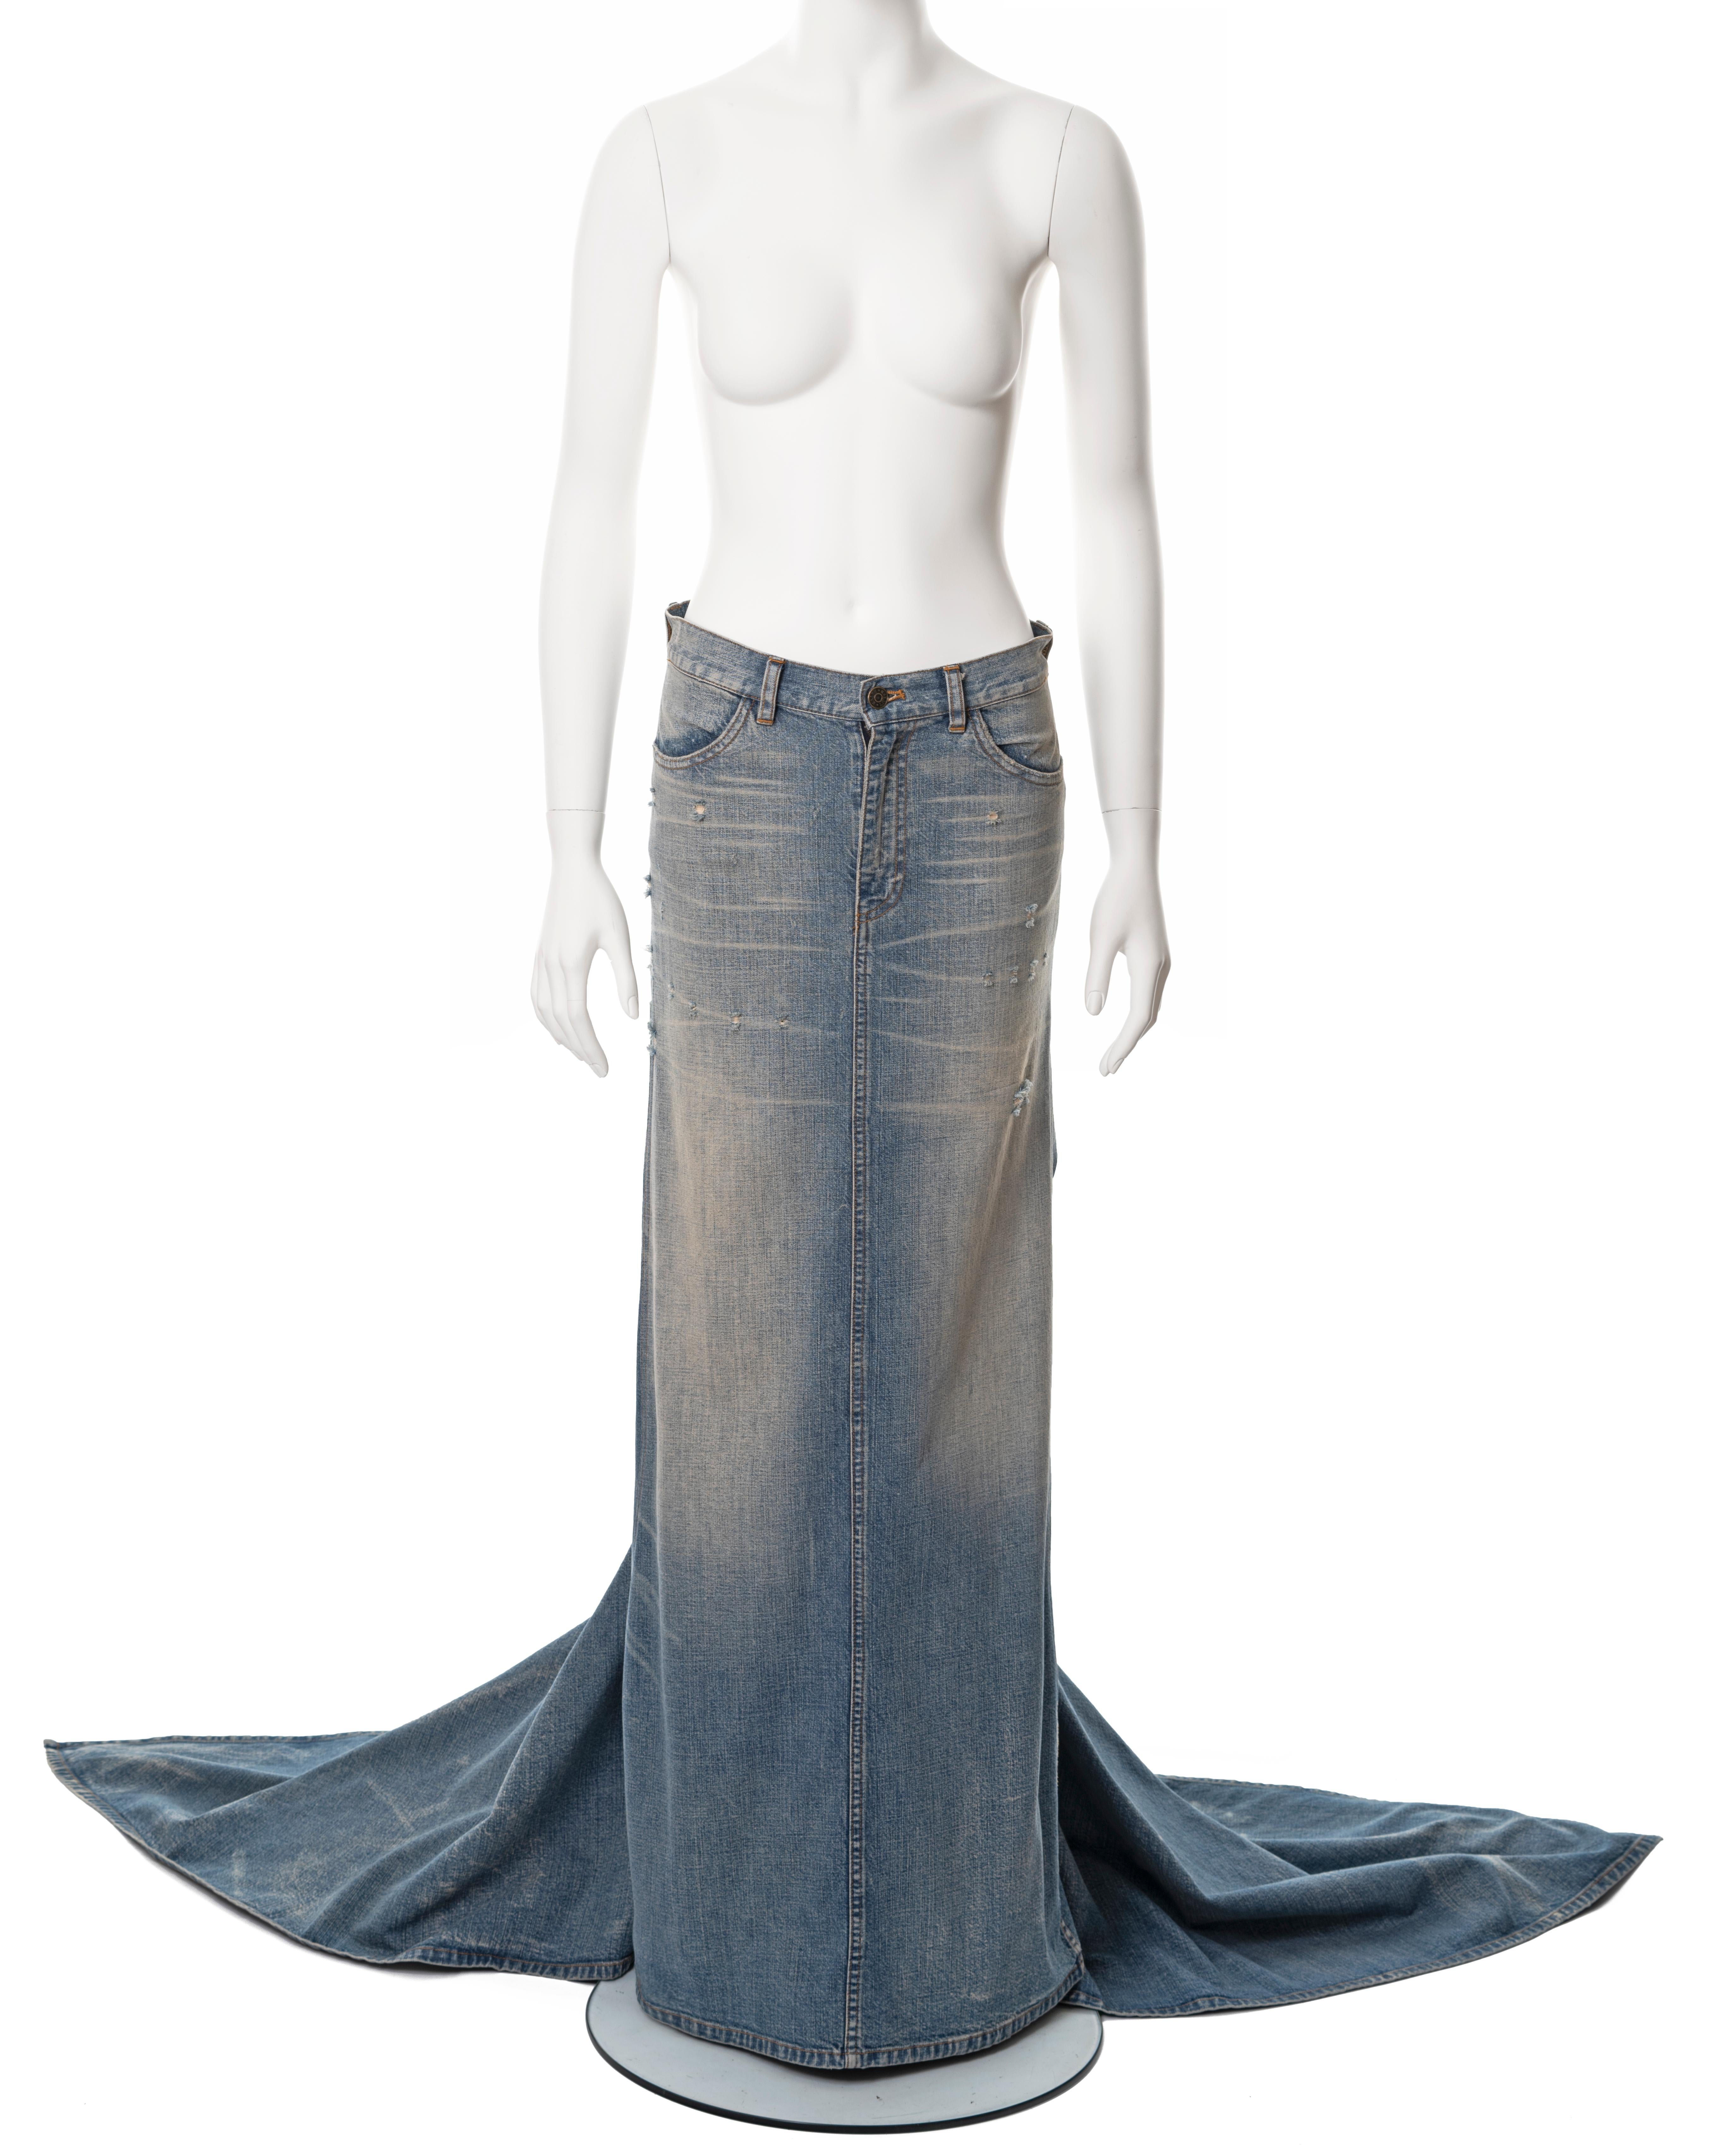 ▪ Ralph Lauren denim maxi skirt 
▪ Sold by One of a Kind Archive
▪ Spring-Summer 2003
▪ Purple label 
▪ Constructed from distressed sandwashed denim 
▪ Low-rise
▪ Pleated centre-back seam 
▪ 2 separate trains 
▪ Size approx. Small / Low waist: